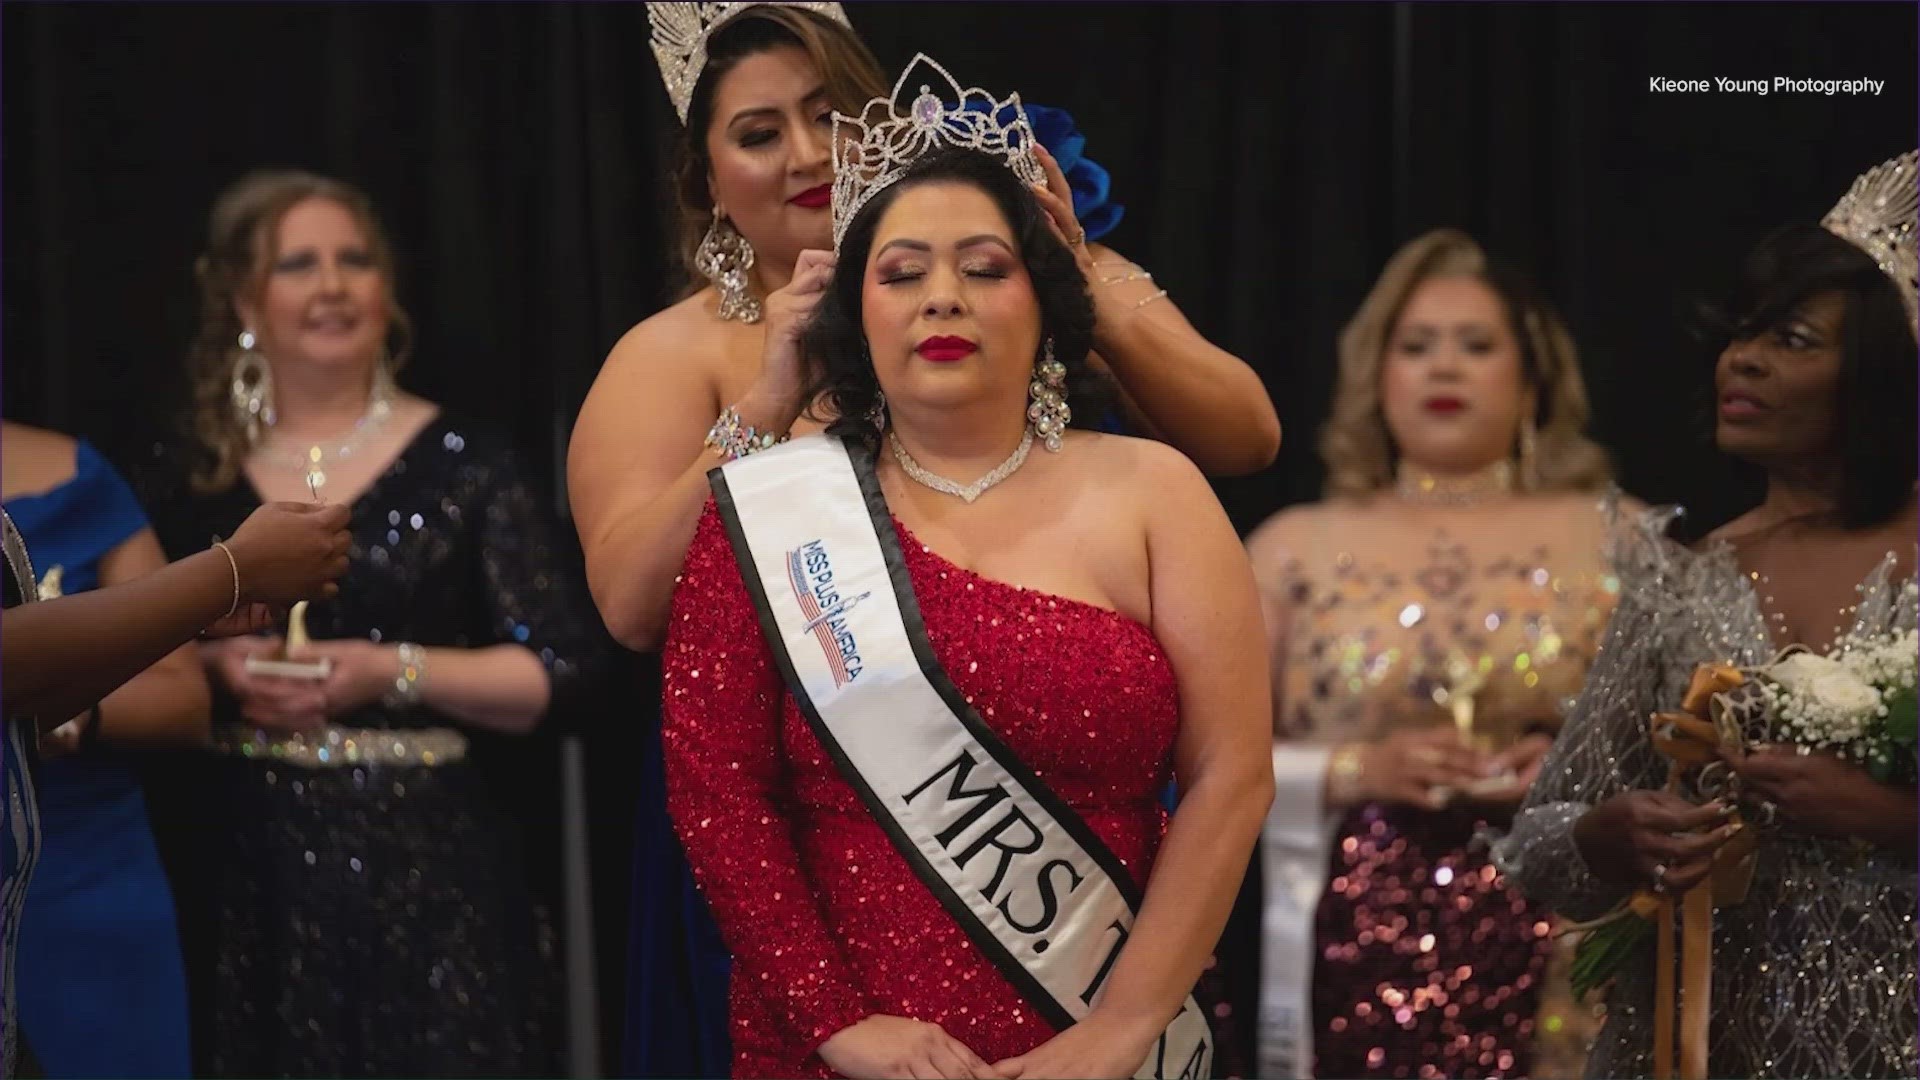 On March 25, the Miss Texas Plus America Pageant crowned local Austinite Christabell Nuñez as Mrs. Texas Plus America 2023.